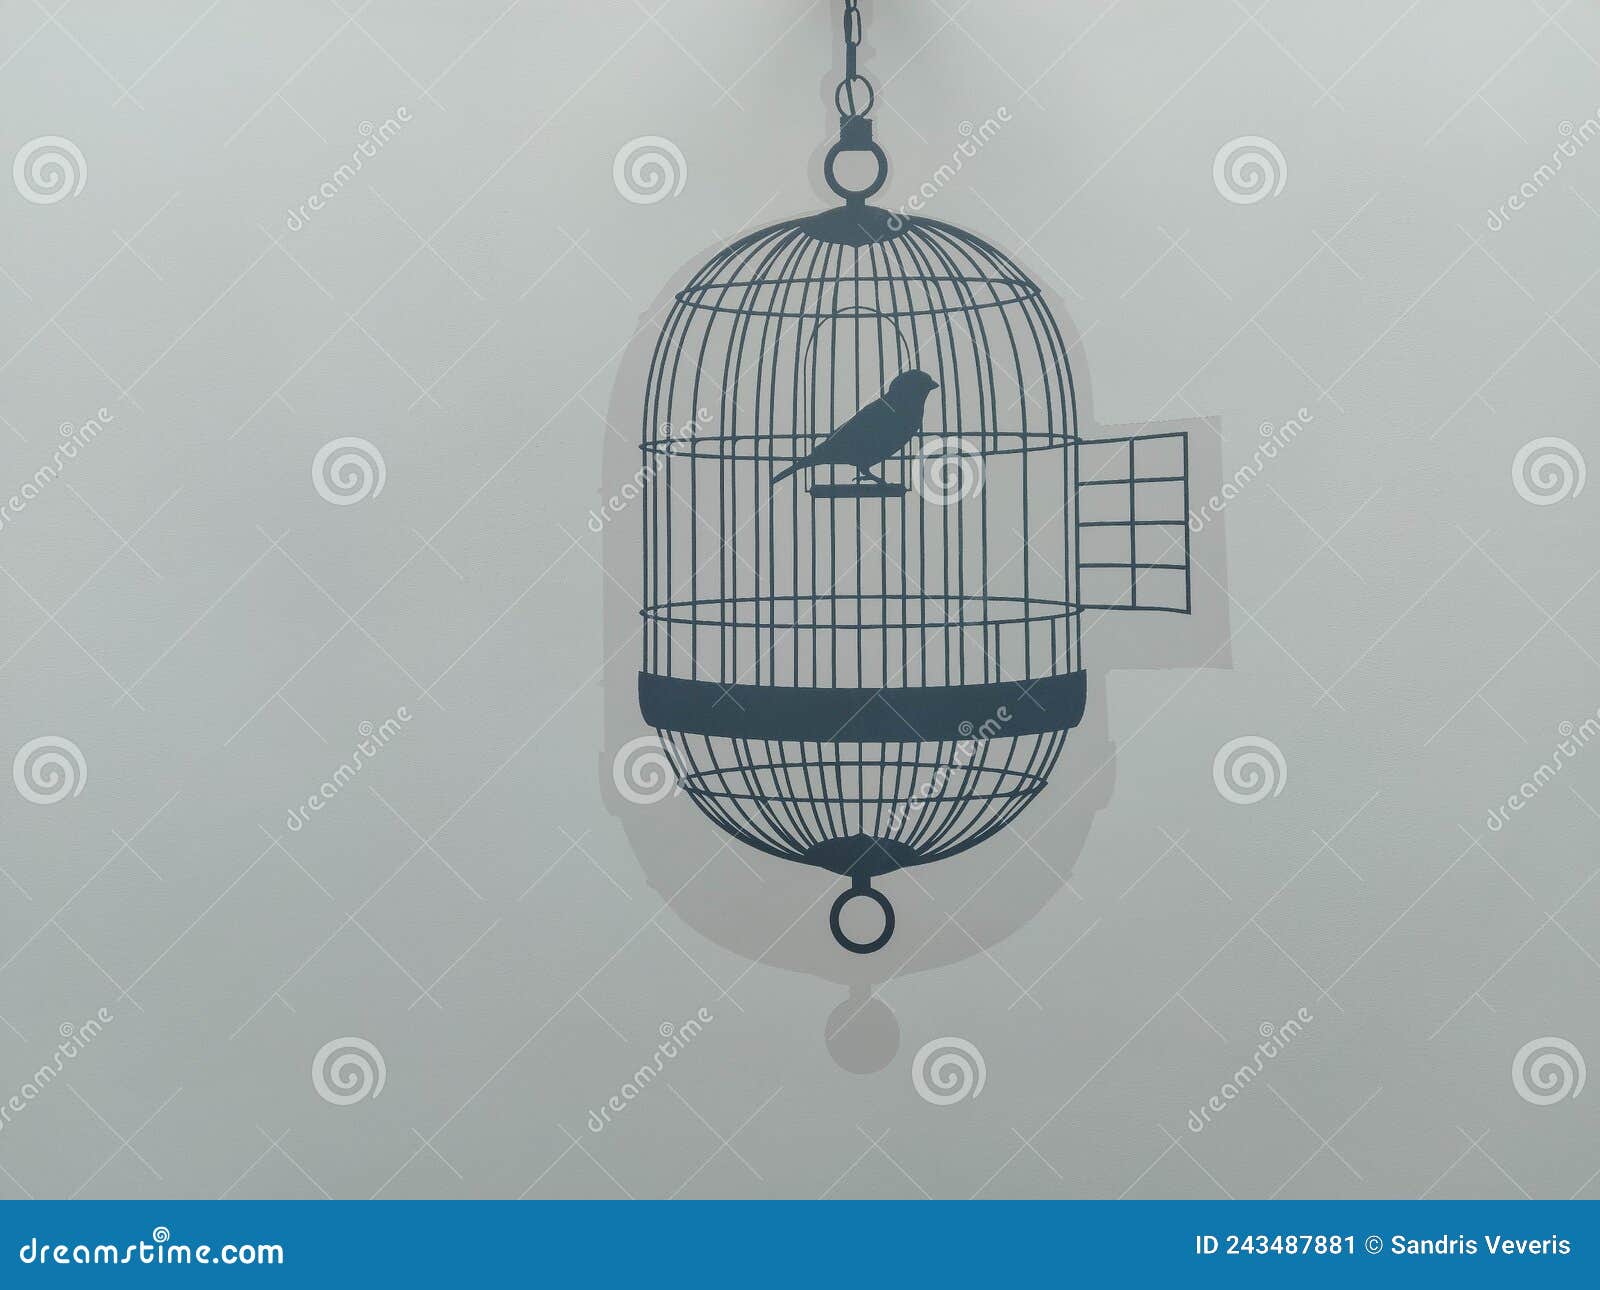 Freedom Minimal Concept, Bird in an Open Cage Stock Image - Image of ...